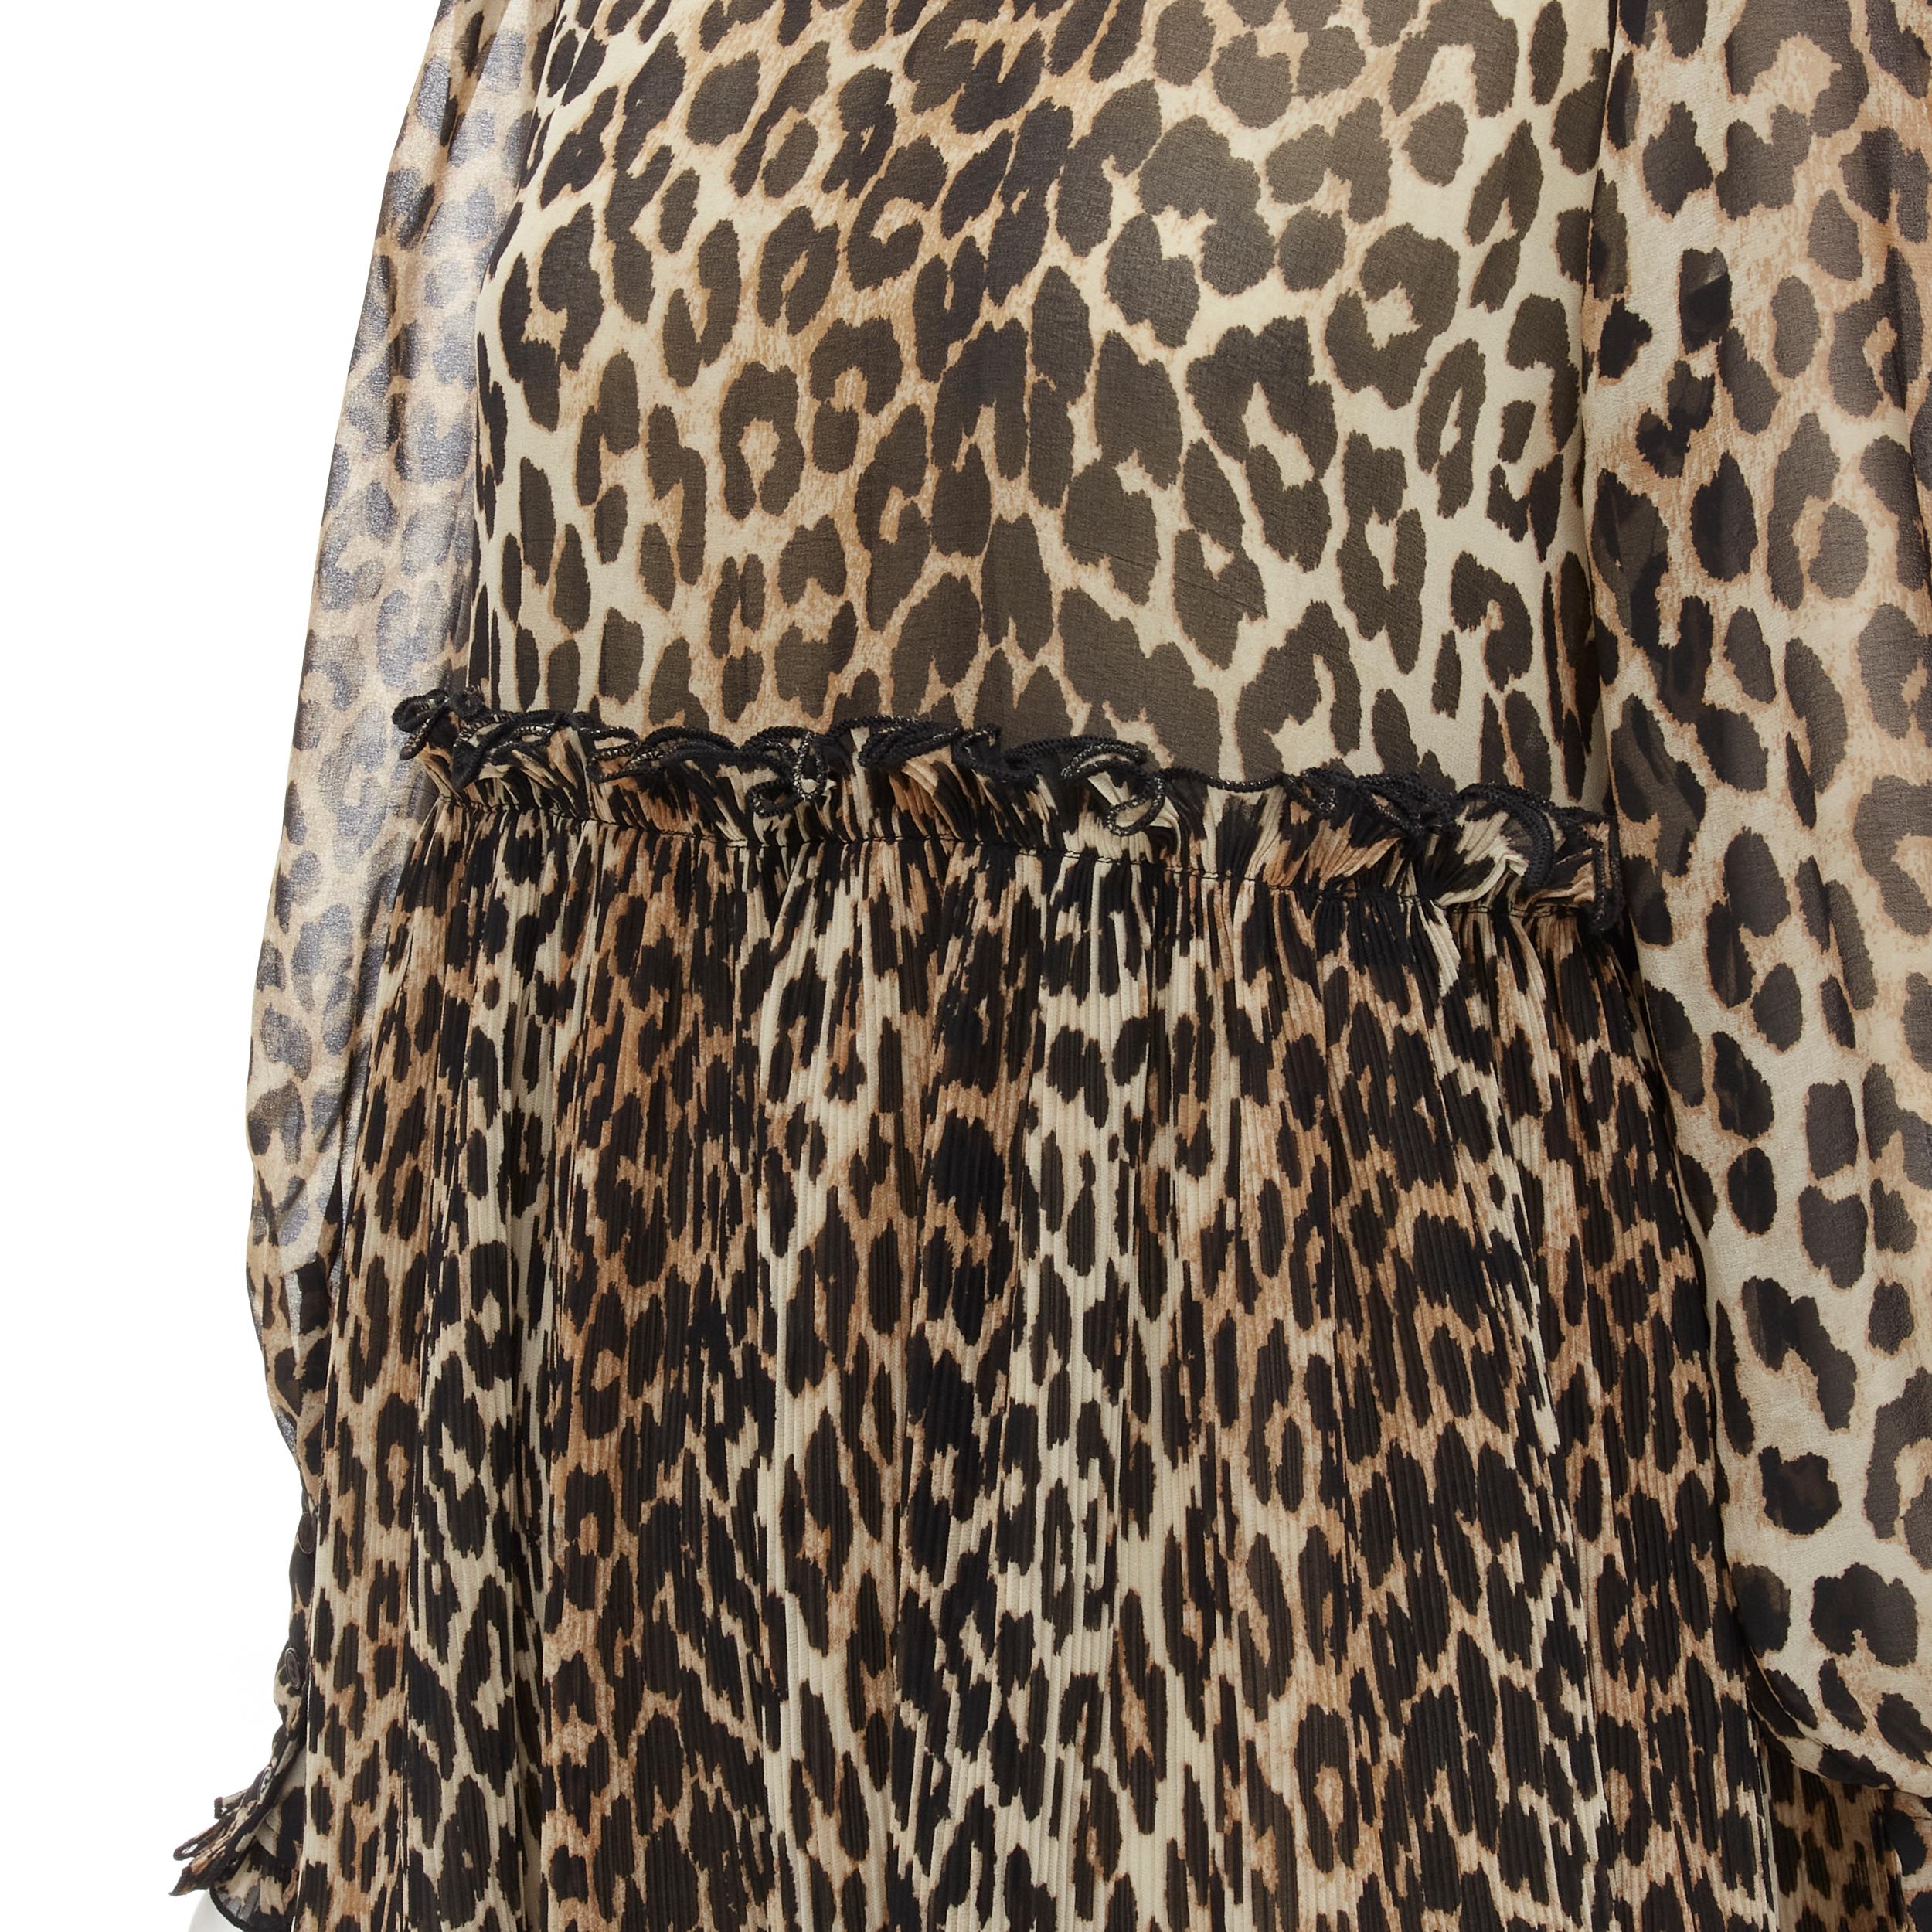 GANNI brown leopard spot print pleated flared babydoll dress FR36 S 
Reference: CECU/A00007 
Brand: Ganni 
Material: Polyester 
Color: Brown 
Pattern: Leopard 
Closure: Zip 
Made in: India 

CONDITION: 
Condition: Excellent, this item was pre-owned